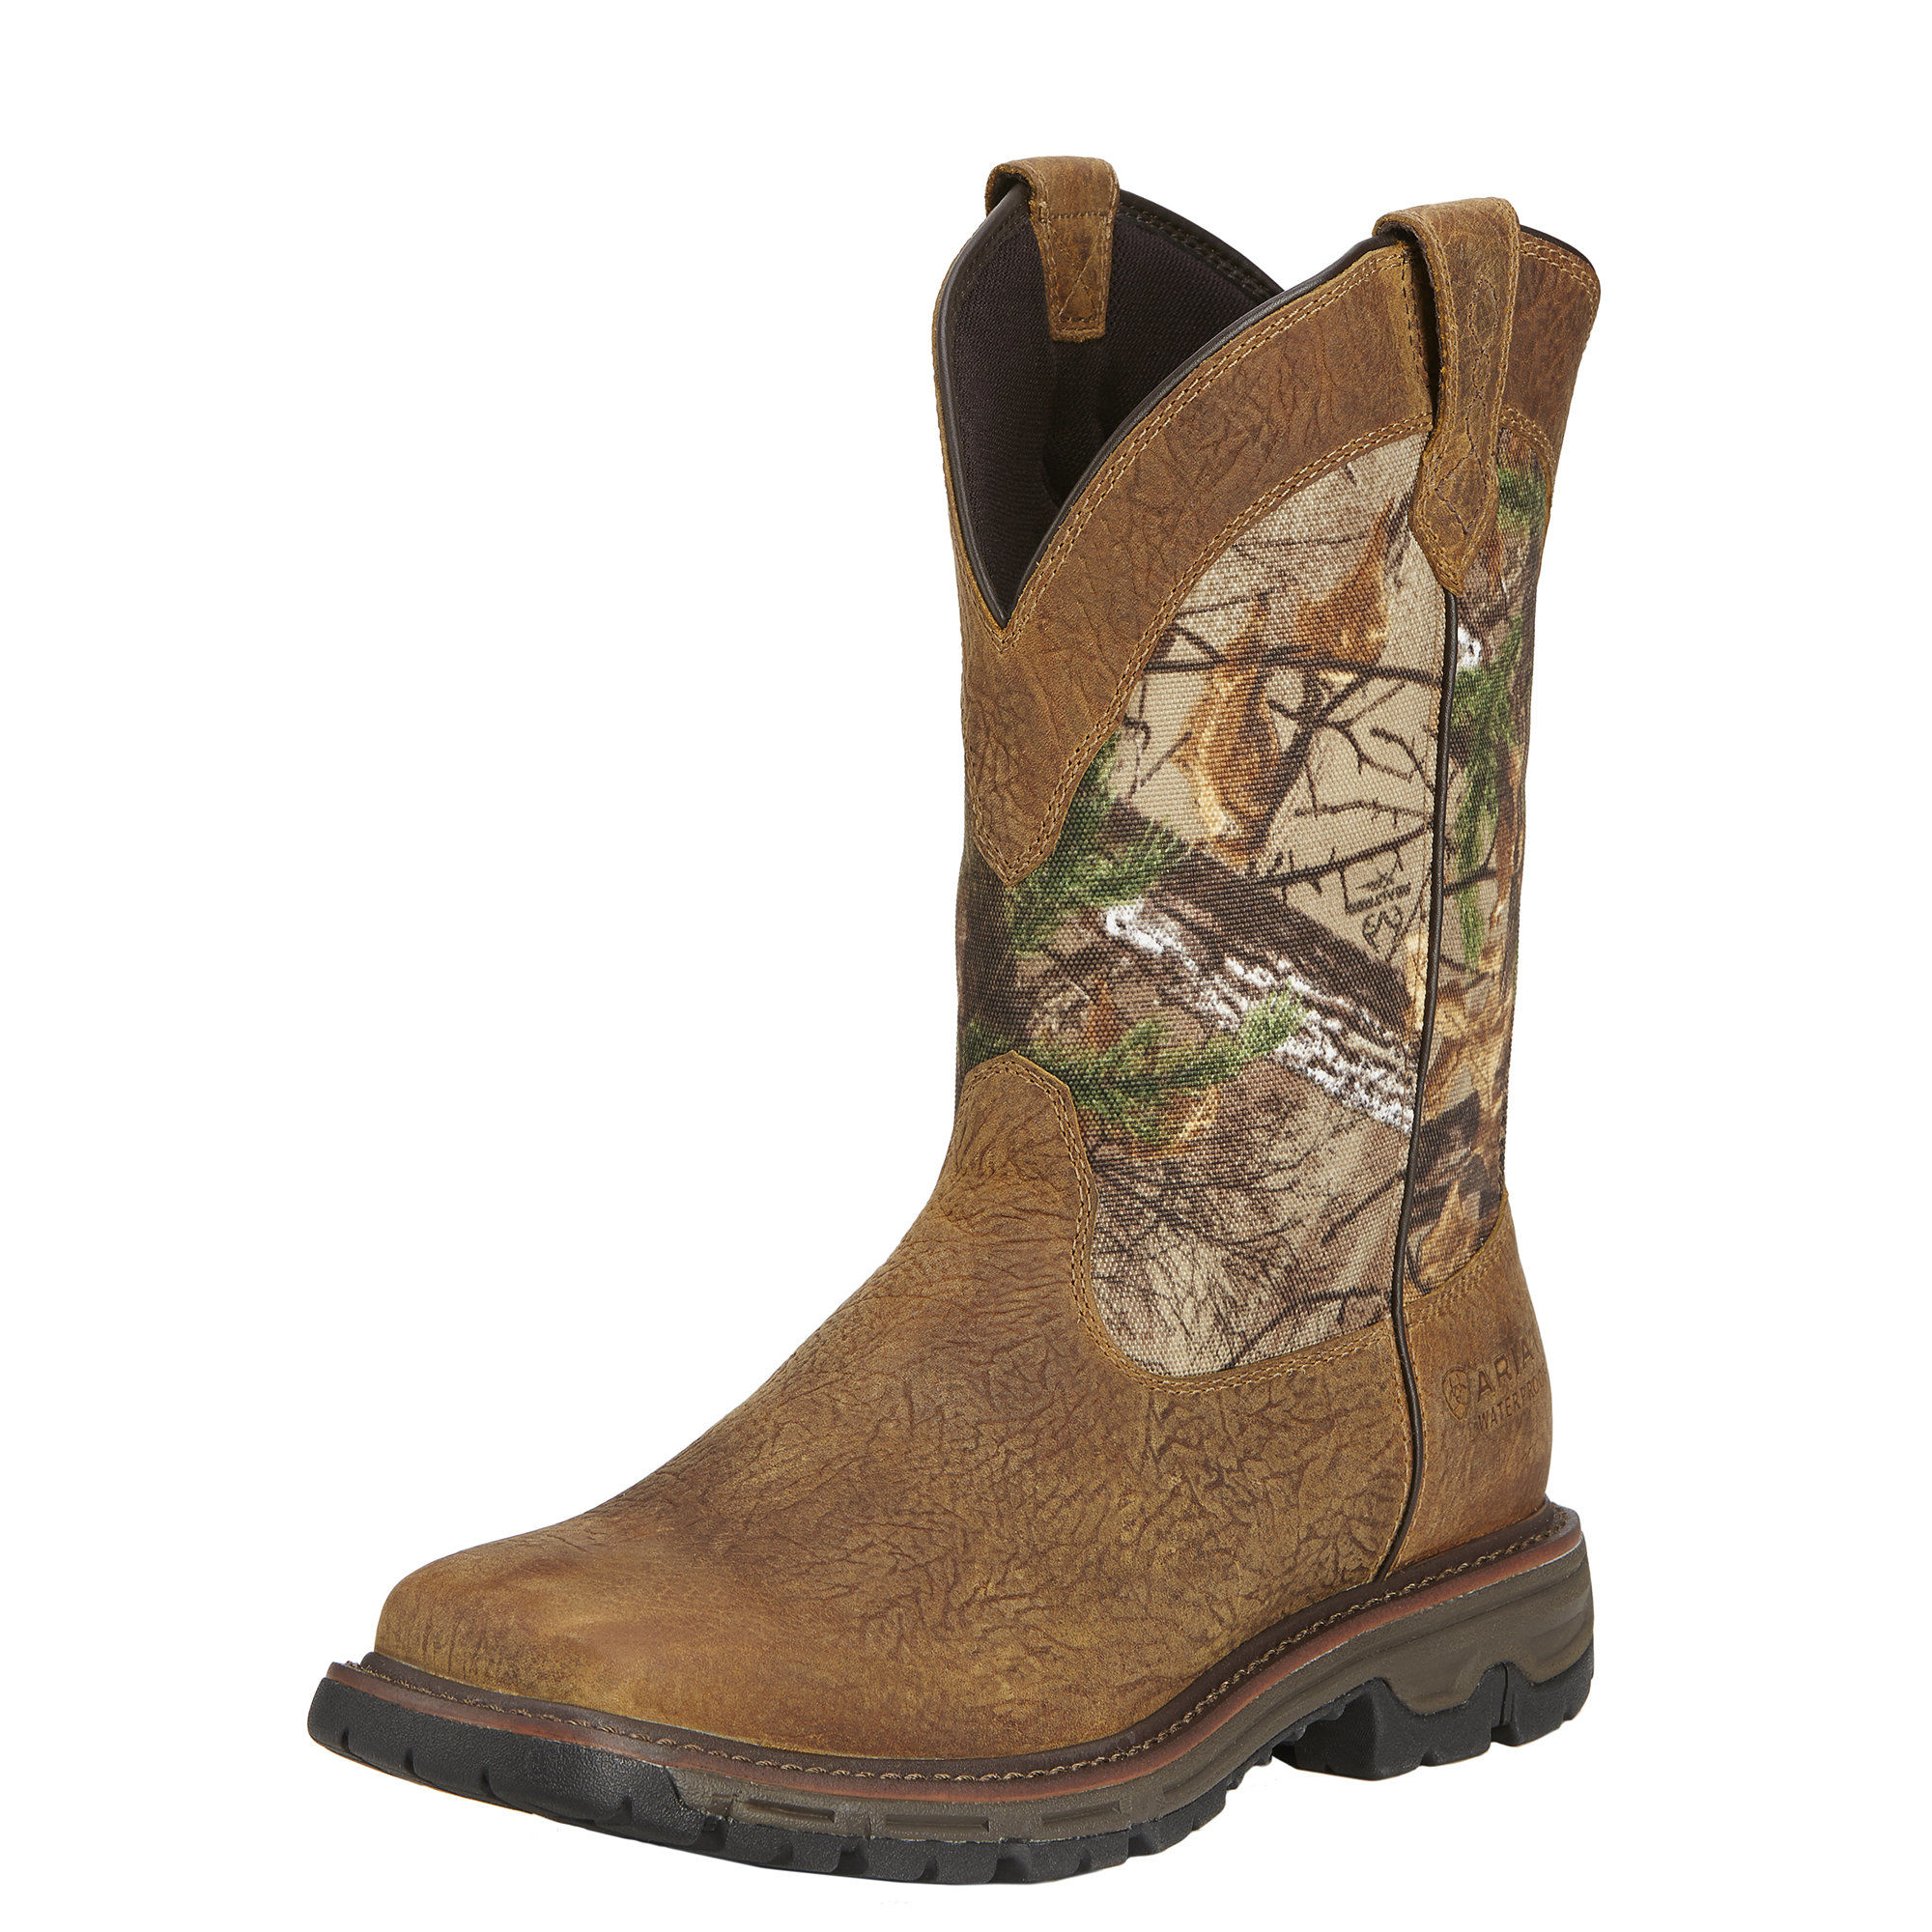 Get the stunning and safe hunting boots